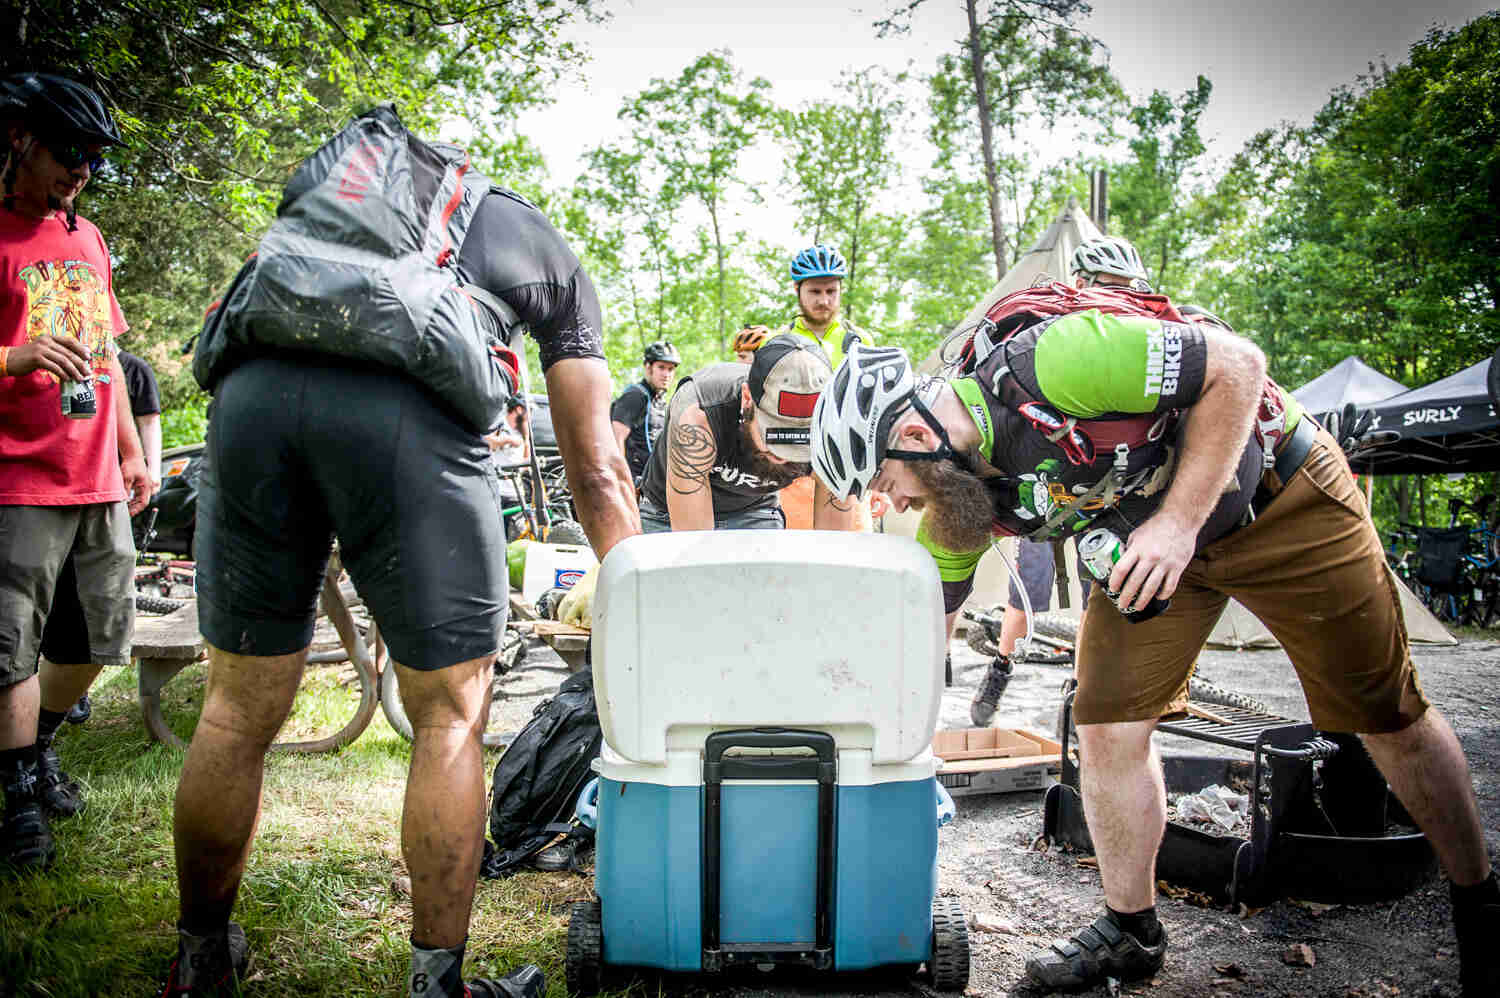 A group of cyclists, reaching into a cooler, at a campsite in the woods